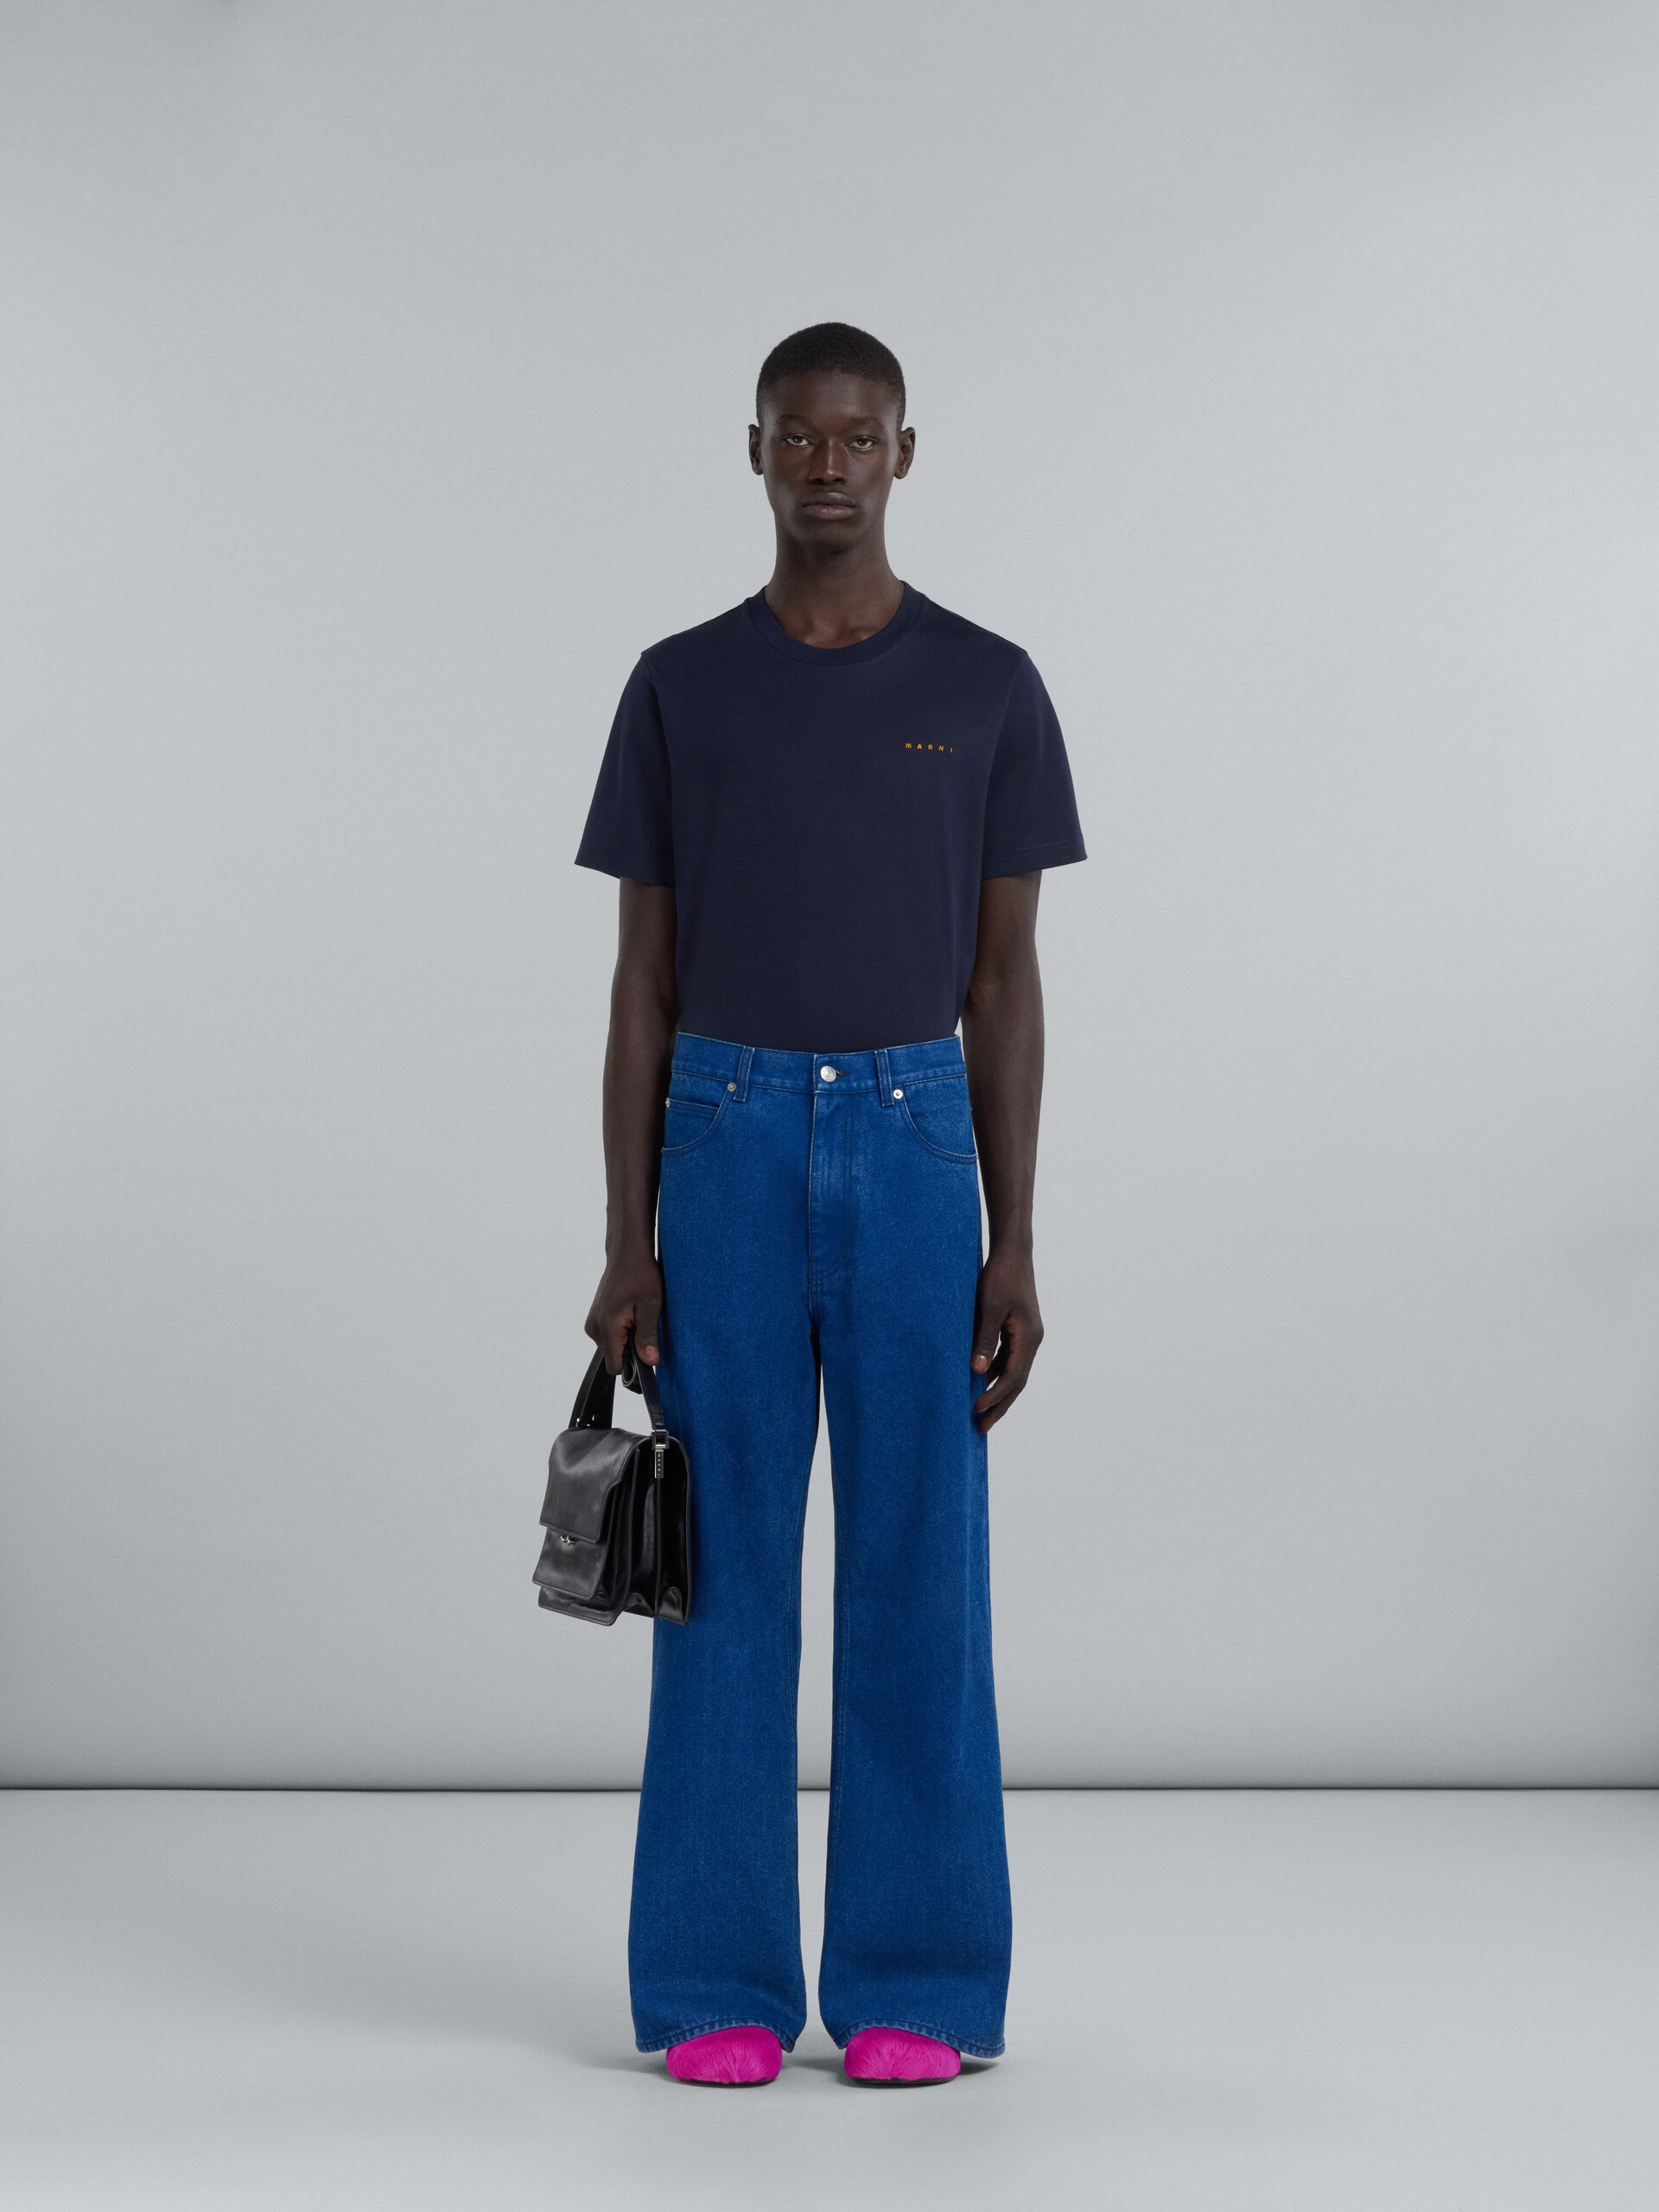 TRUNK Bag In Single Color Calfskin ‎ from the Marni ‎Fall Winter 2018 ‎  collection